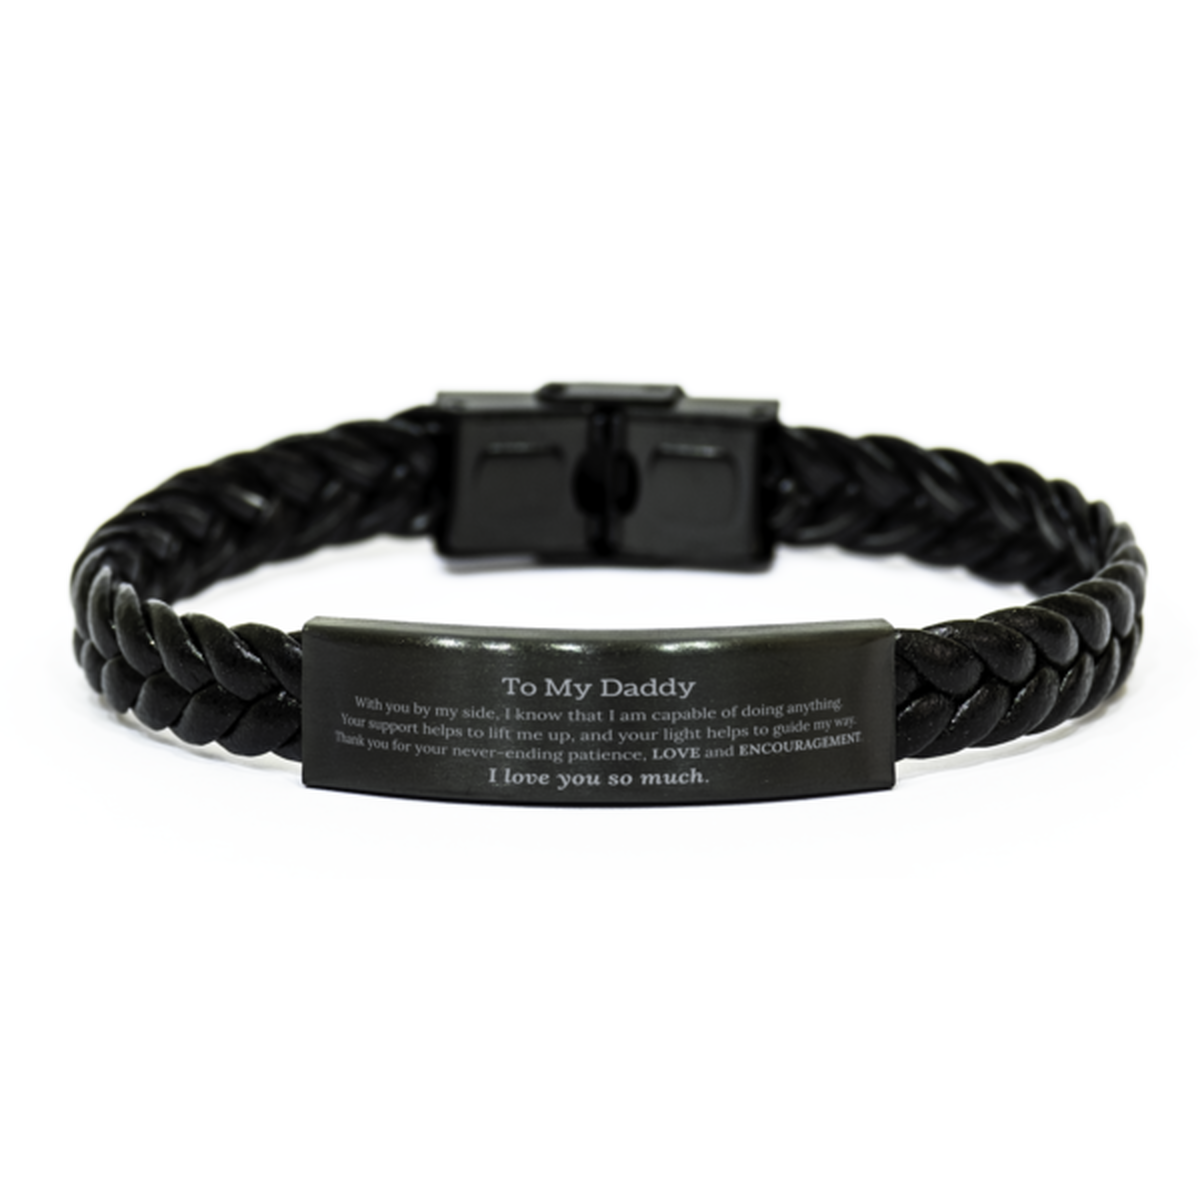 Appreciation Daddy Braided Leather Bracelet Gifts, To My Daddy Birthday Christmas Wedding Keepsake Gifts for Daddy With you by my side, I know that I am capable of doing anything. I love you so much